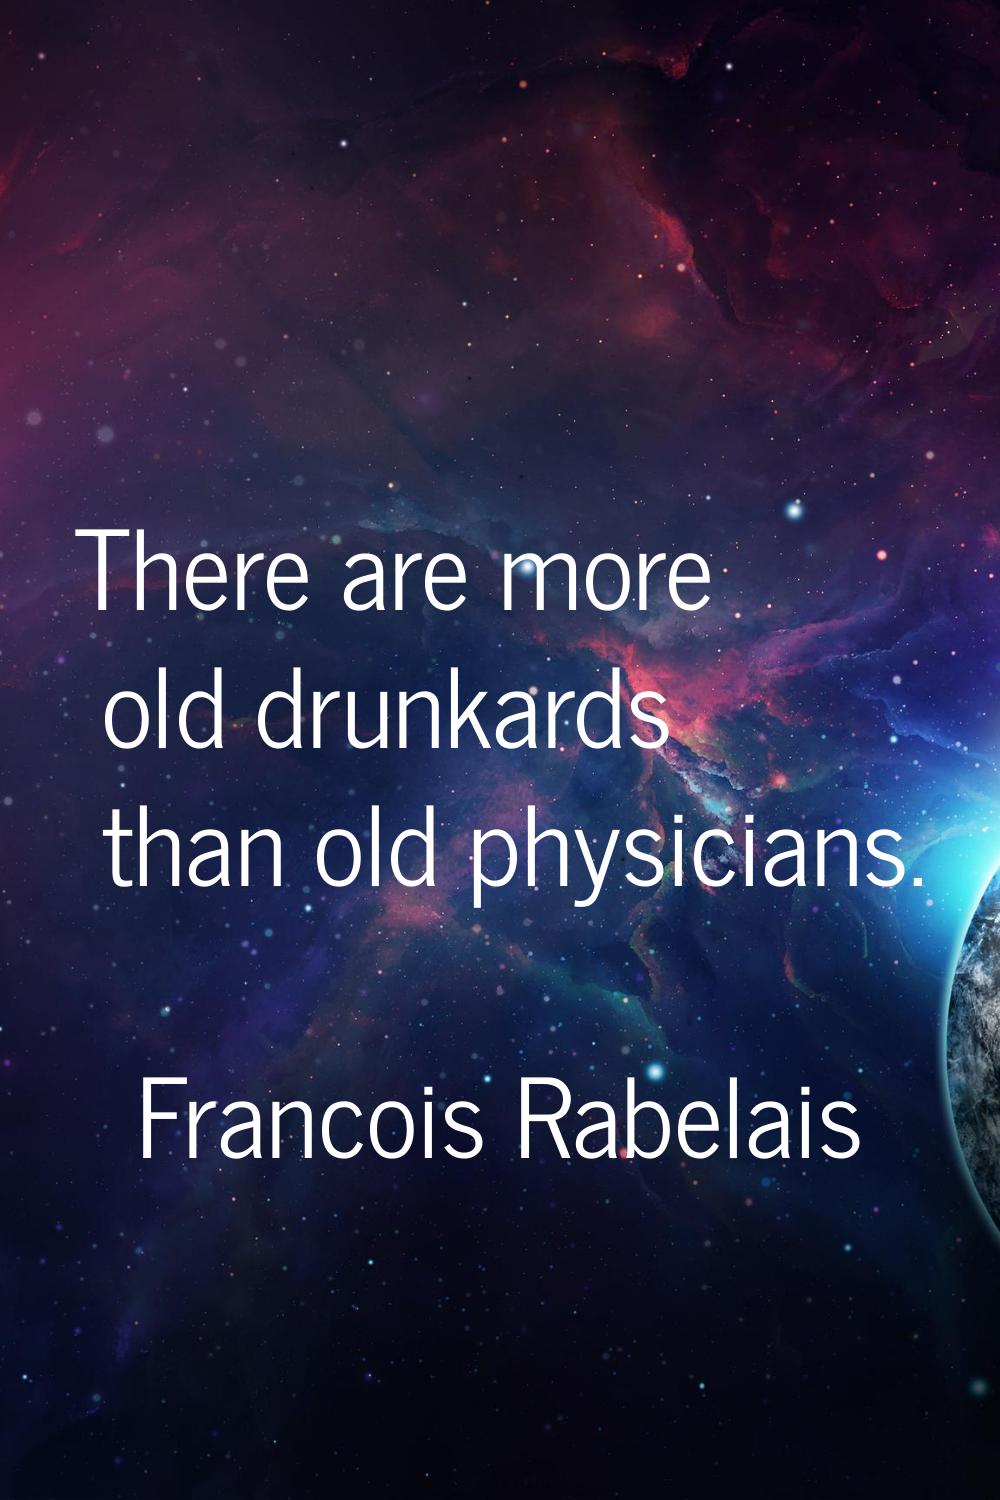 There are more old drunkards than old physicians.